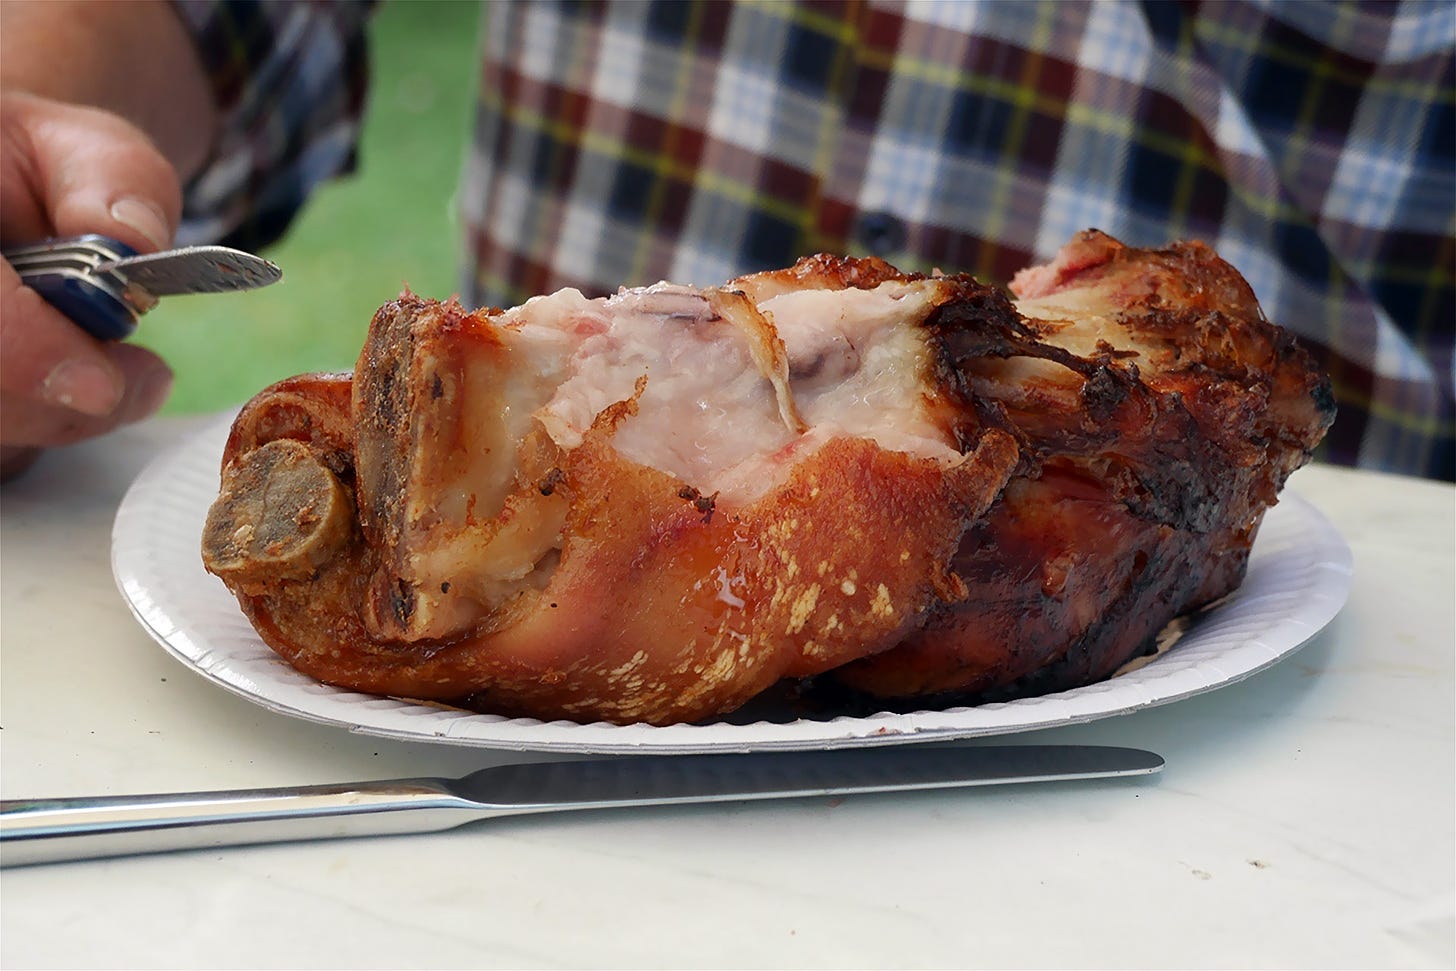 A close-up image of a large, greasy German pig knuckle served on a white paper plate. The pig knuckle has a crispy, golden-brown exterior and tender, juicy interior, with some visible fat and meat. In the background, a person wearing a plaid shirt is holding a knife, ready to cut into the meat. A stainless steel fork and knife are placed on the table next to the plate. The setting appears to be an outdoor dining area, possibly a beer garden, with a blurred green background. Public domain.